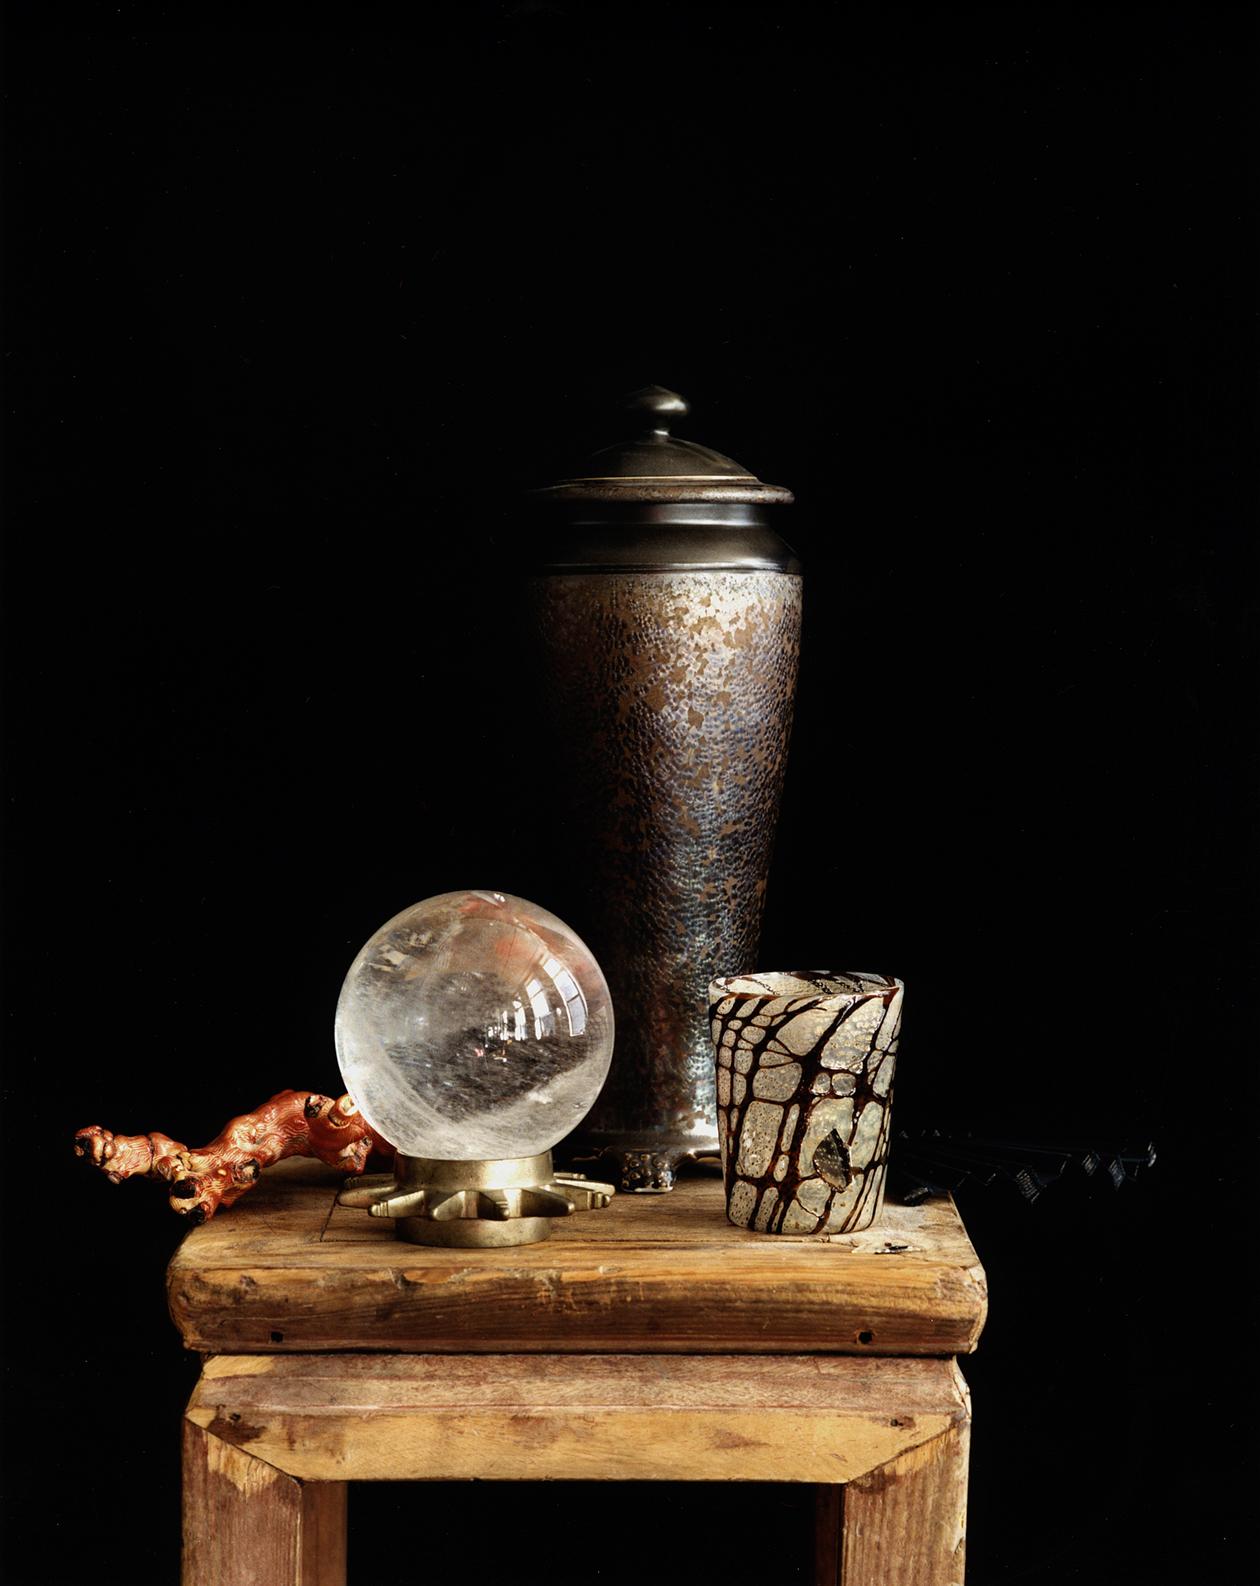 Michael James O’Brien Still-Life Photograph - Still Life with a Coral Branch and a Crystal Globe, NYC. Color photograph